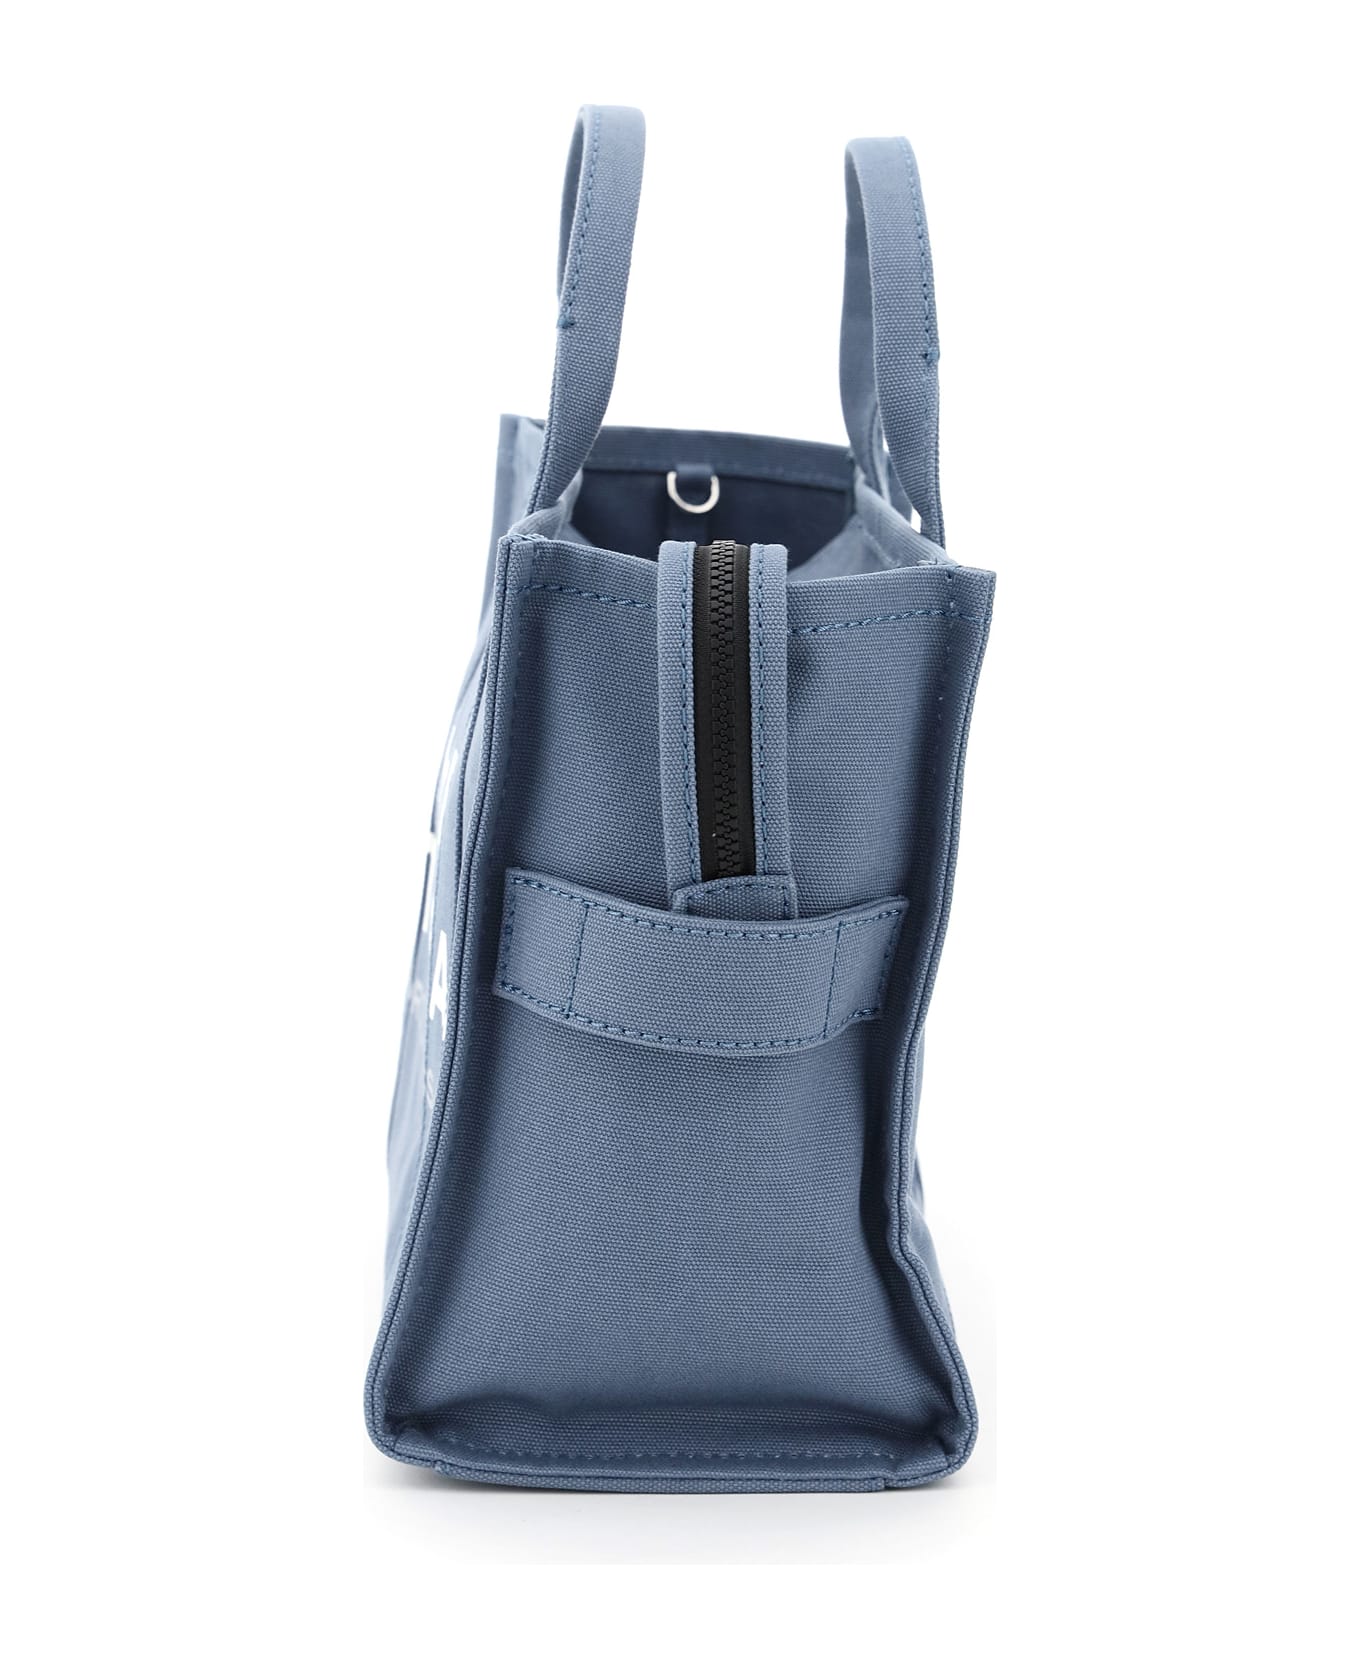 Marc Jacobs The Tote Bag Medium - Blue Shadow トートバッグ